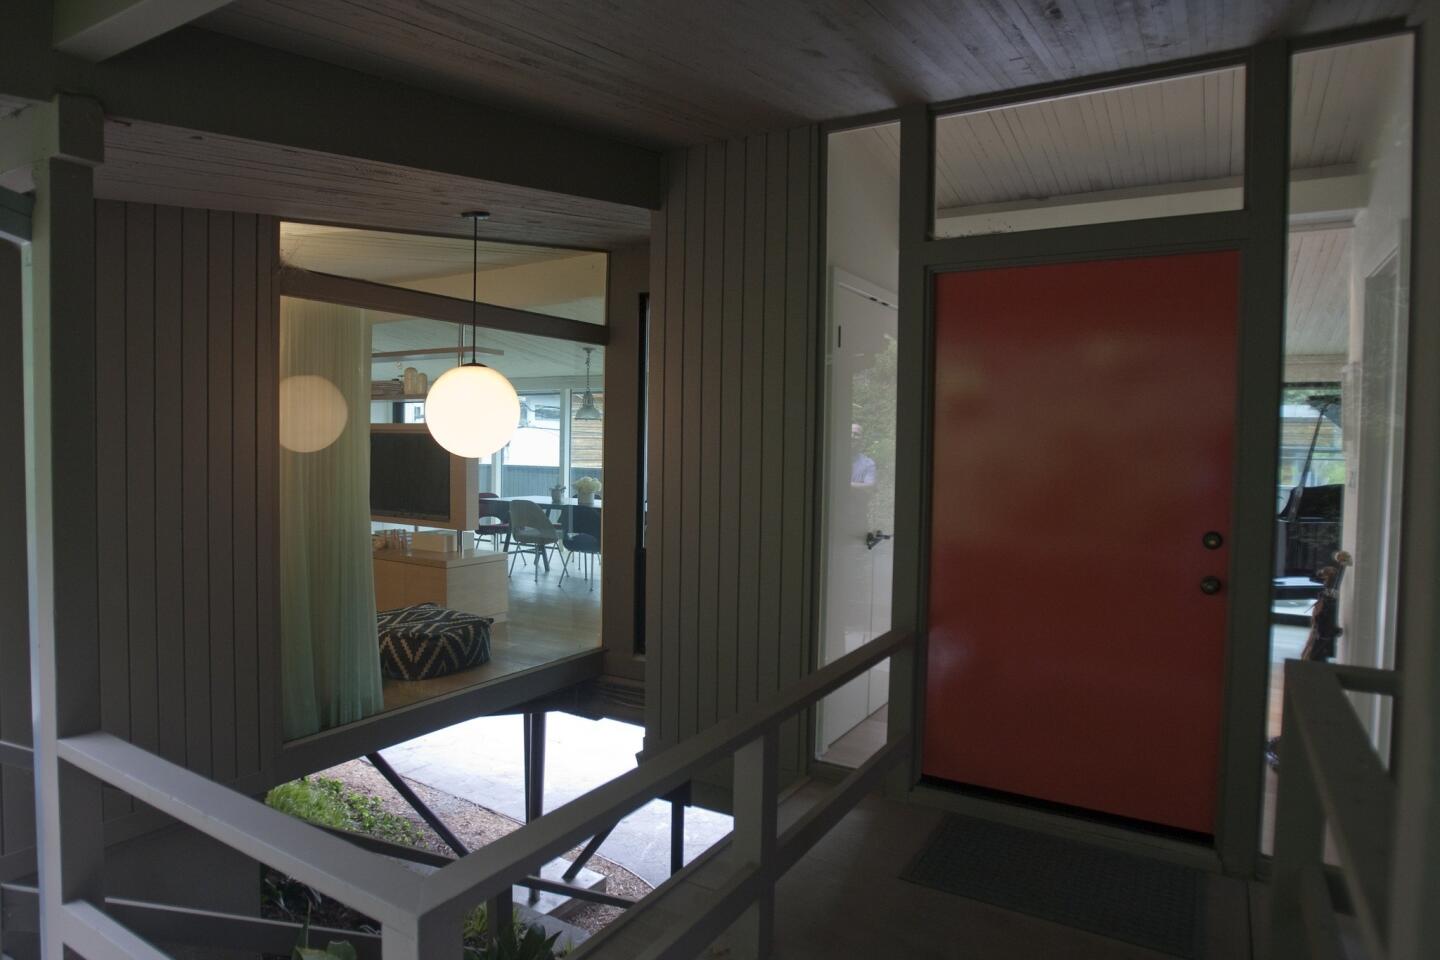 The front door, painted a bright orange inspired by Dutch painter Piet Mondrian, is original to the house. At lower left are some of the steel posts that elevate the house, giving it the feel of a Modernist treehouse.